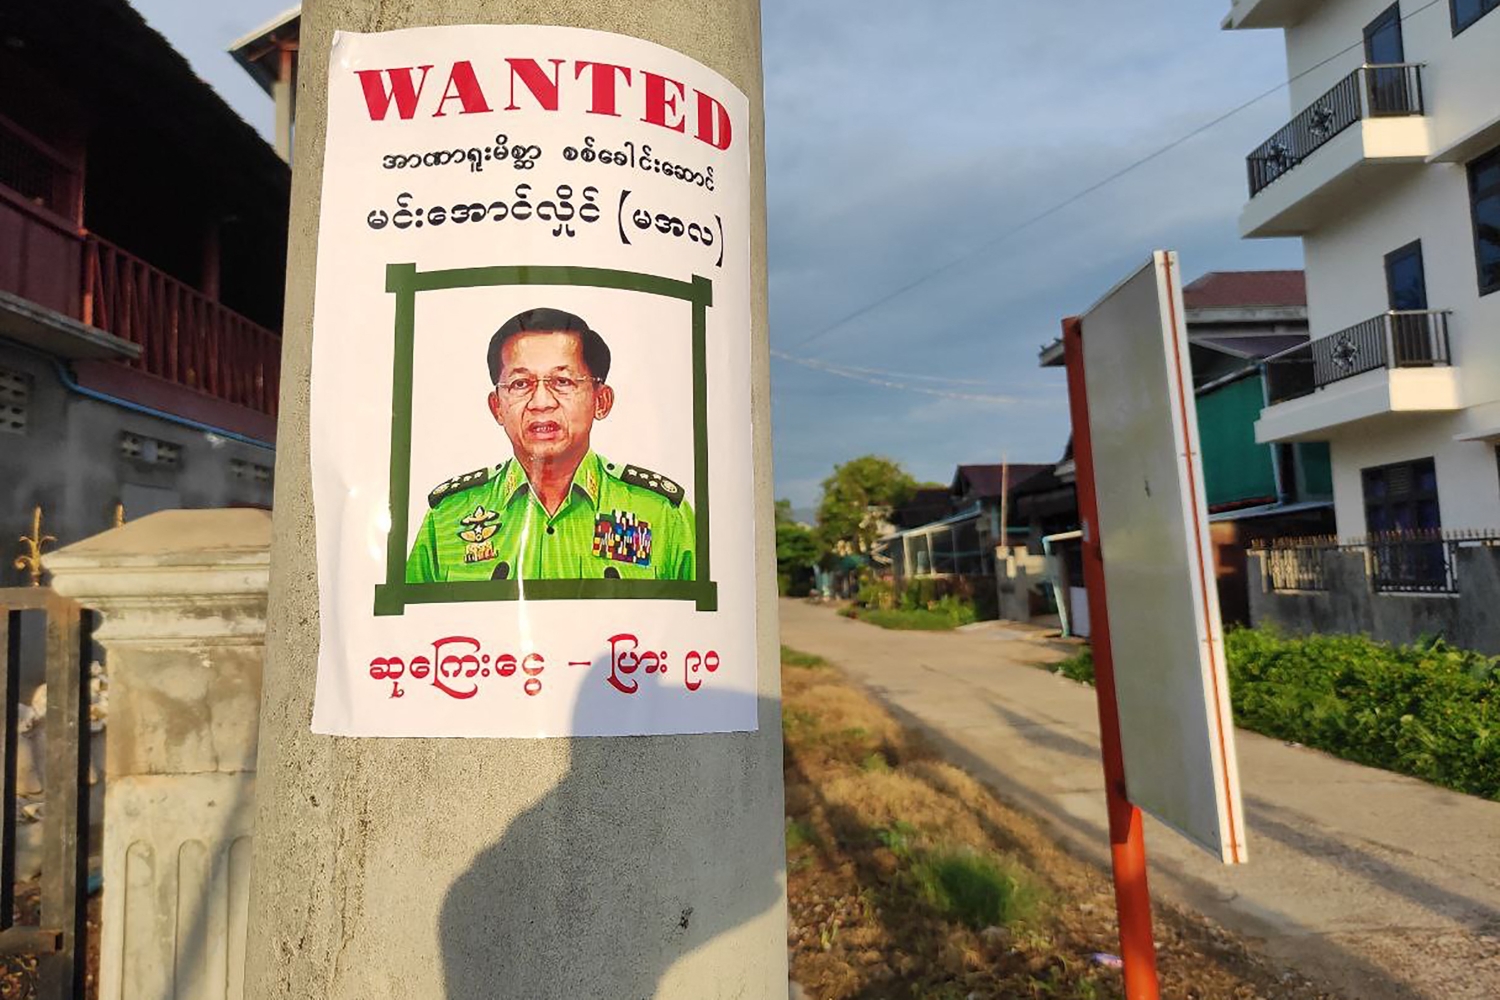 Protesters in Dawei hang a wanted poster for Senior General Min Aung Hlaing in May 2021. (Dawei Watch / AFP)